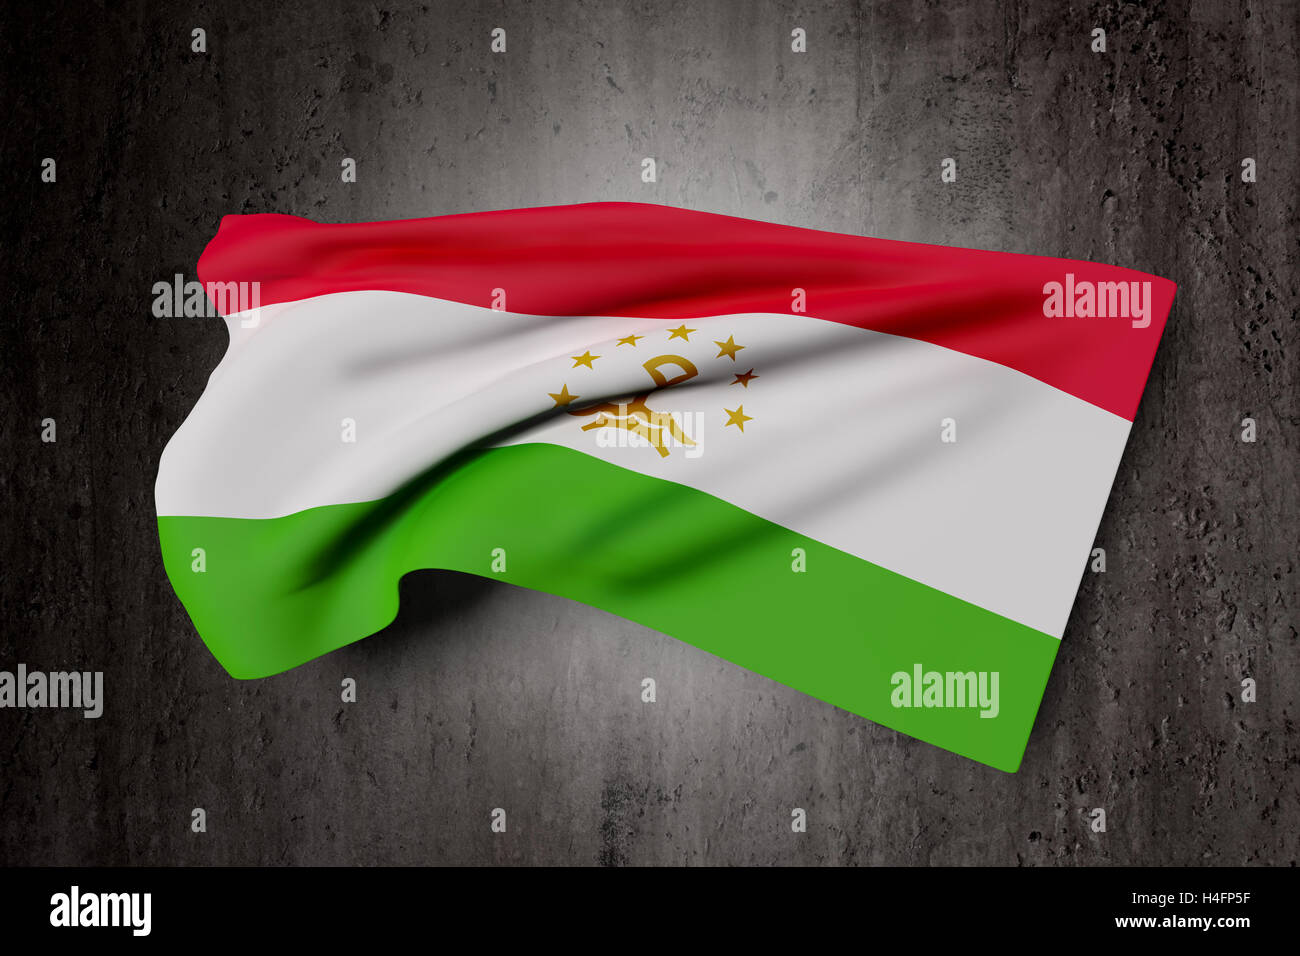 3d rendering of Republic of Tajikistan flag waving on dirty background Stock Photo